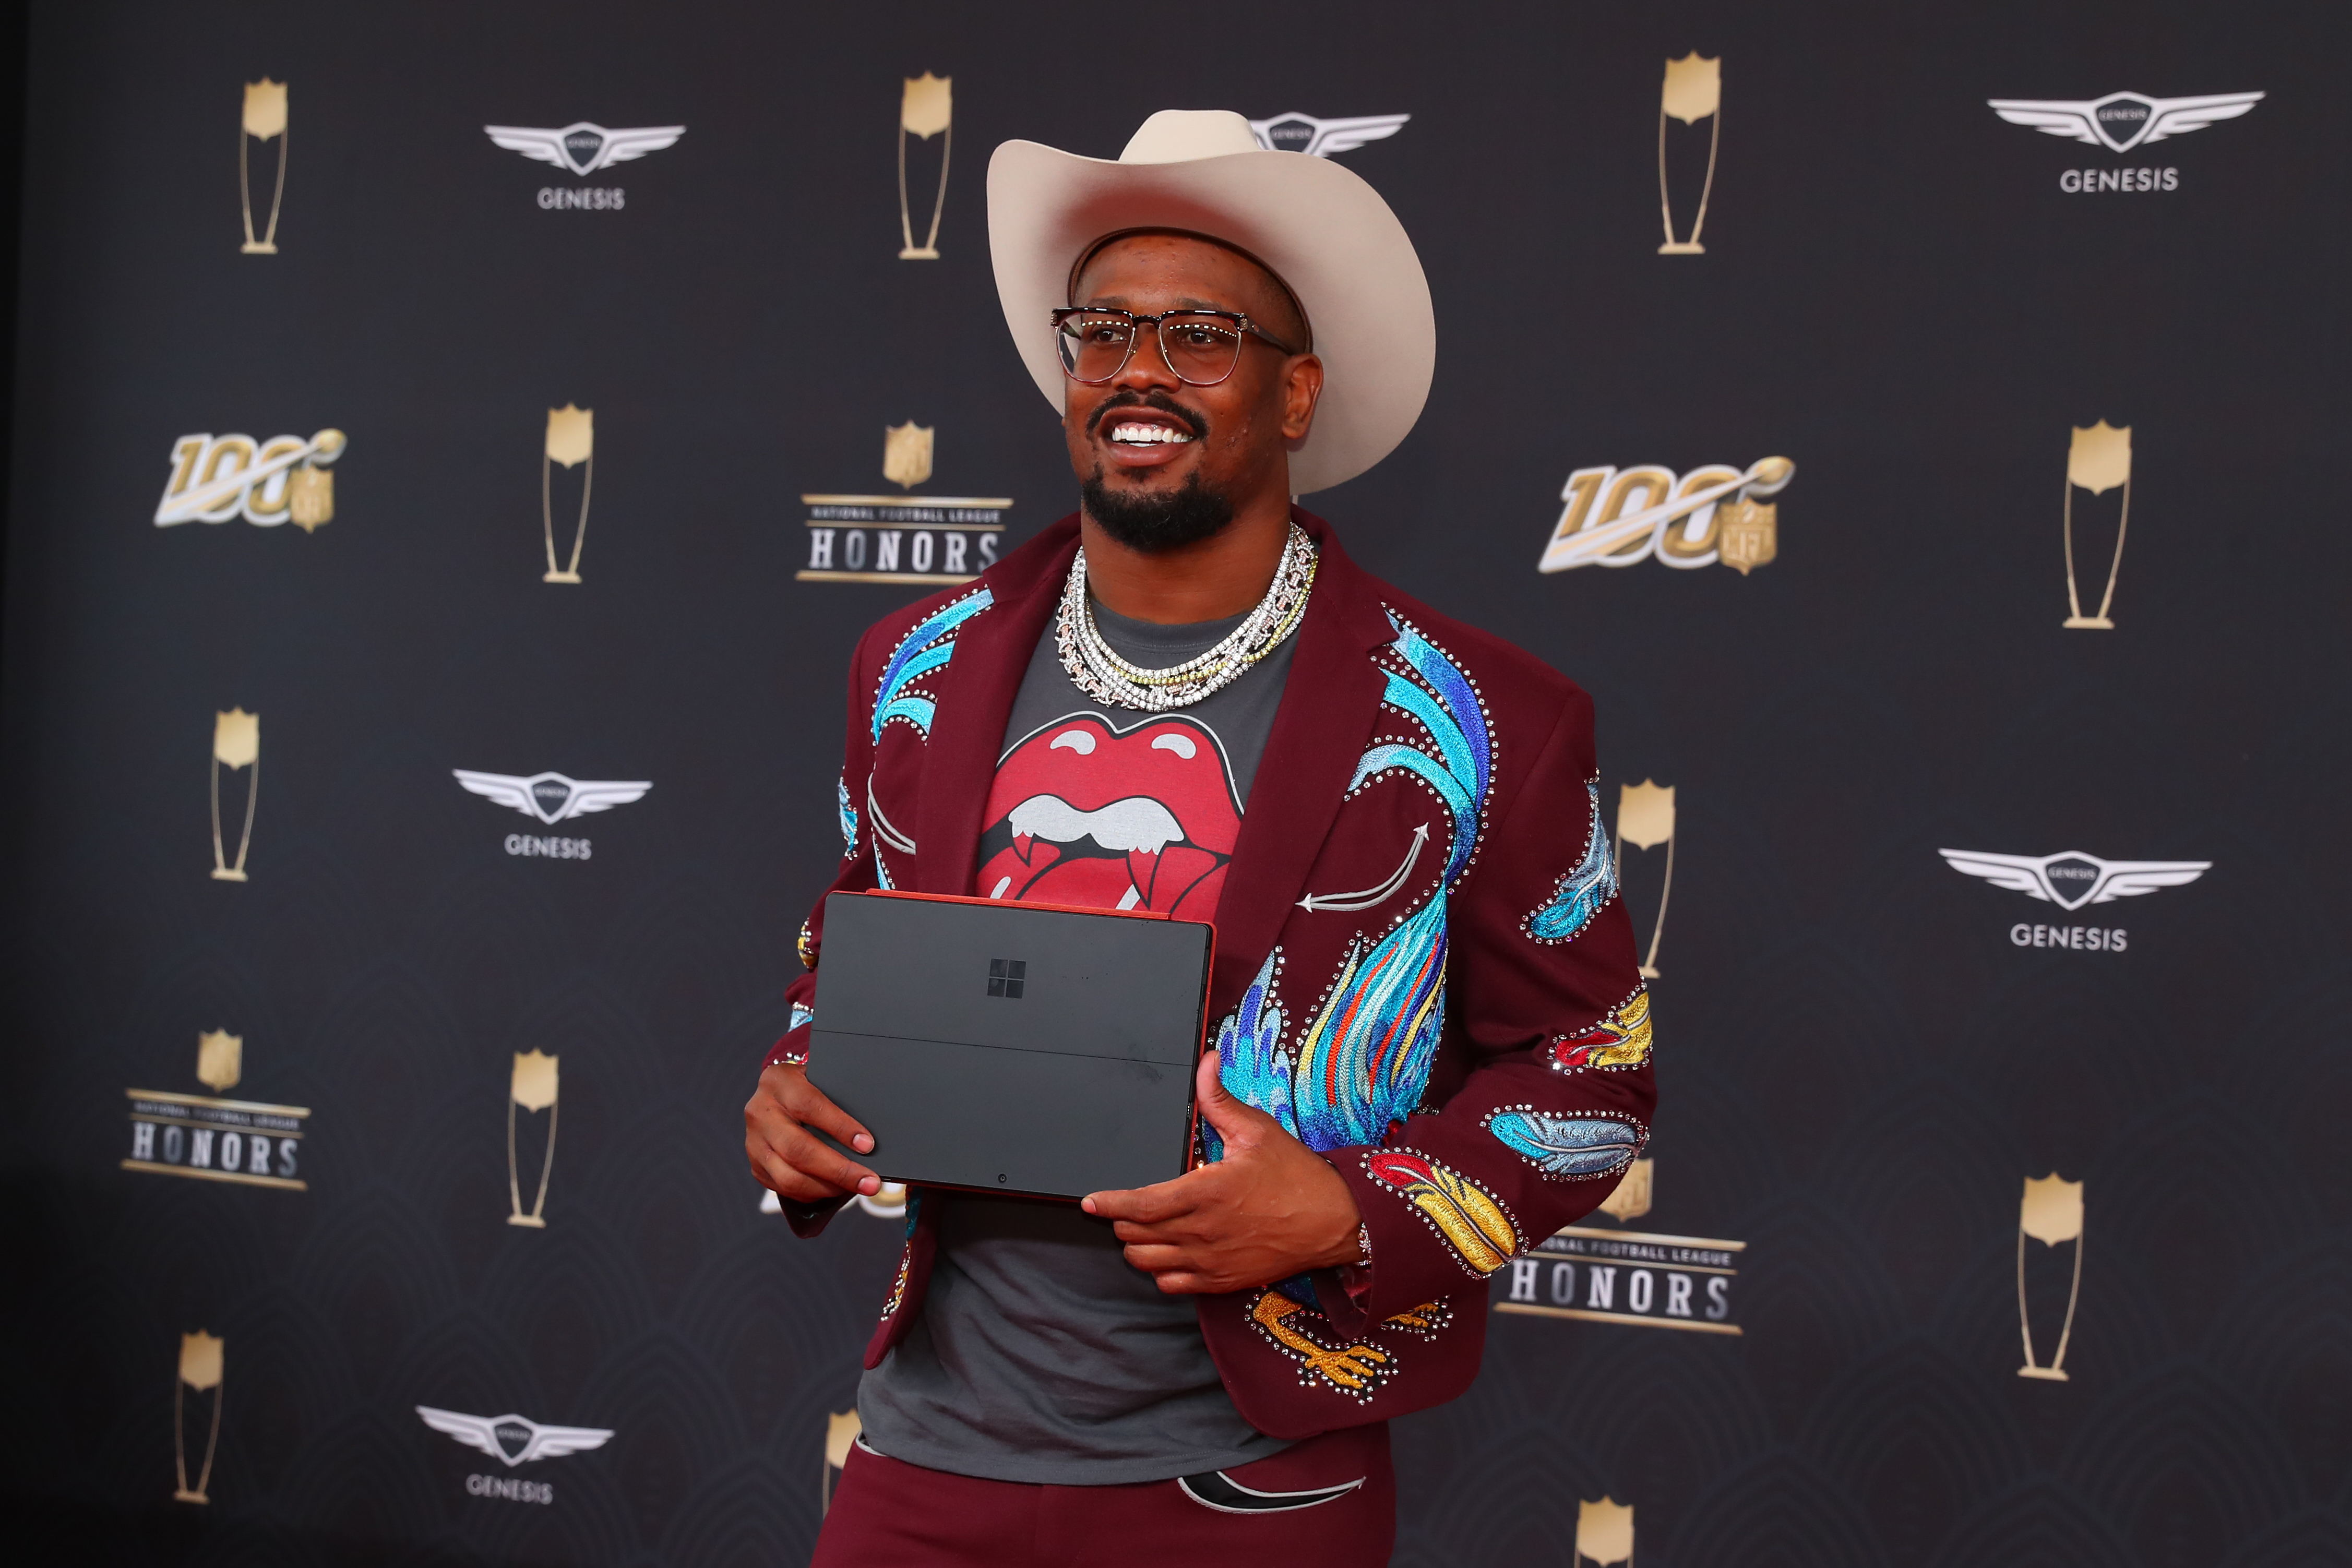 Von Miller’s 2,000-Square-Foot Closet Is Nearly as Big as the Denver Broncos’ Locker Room